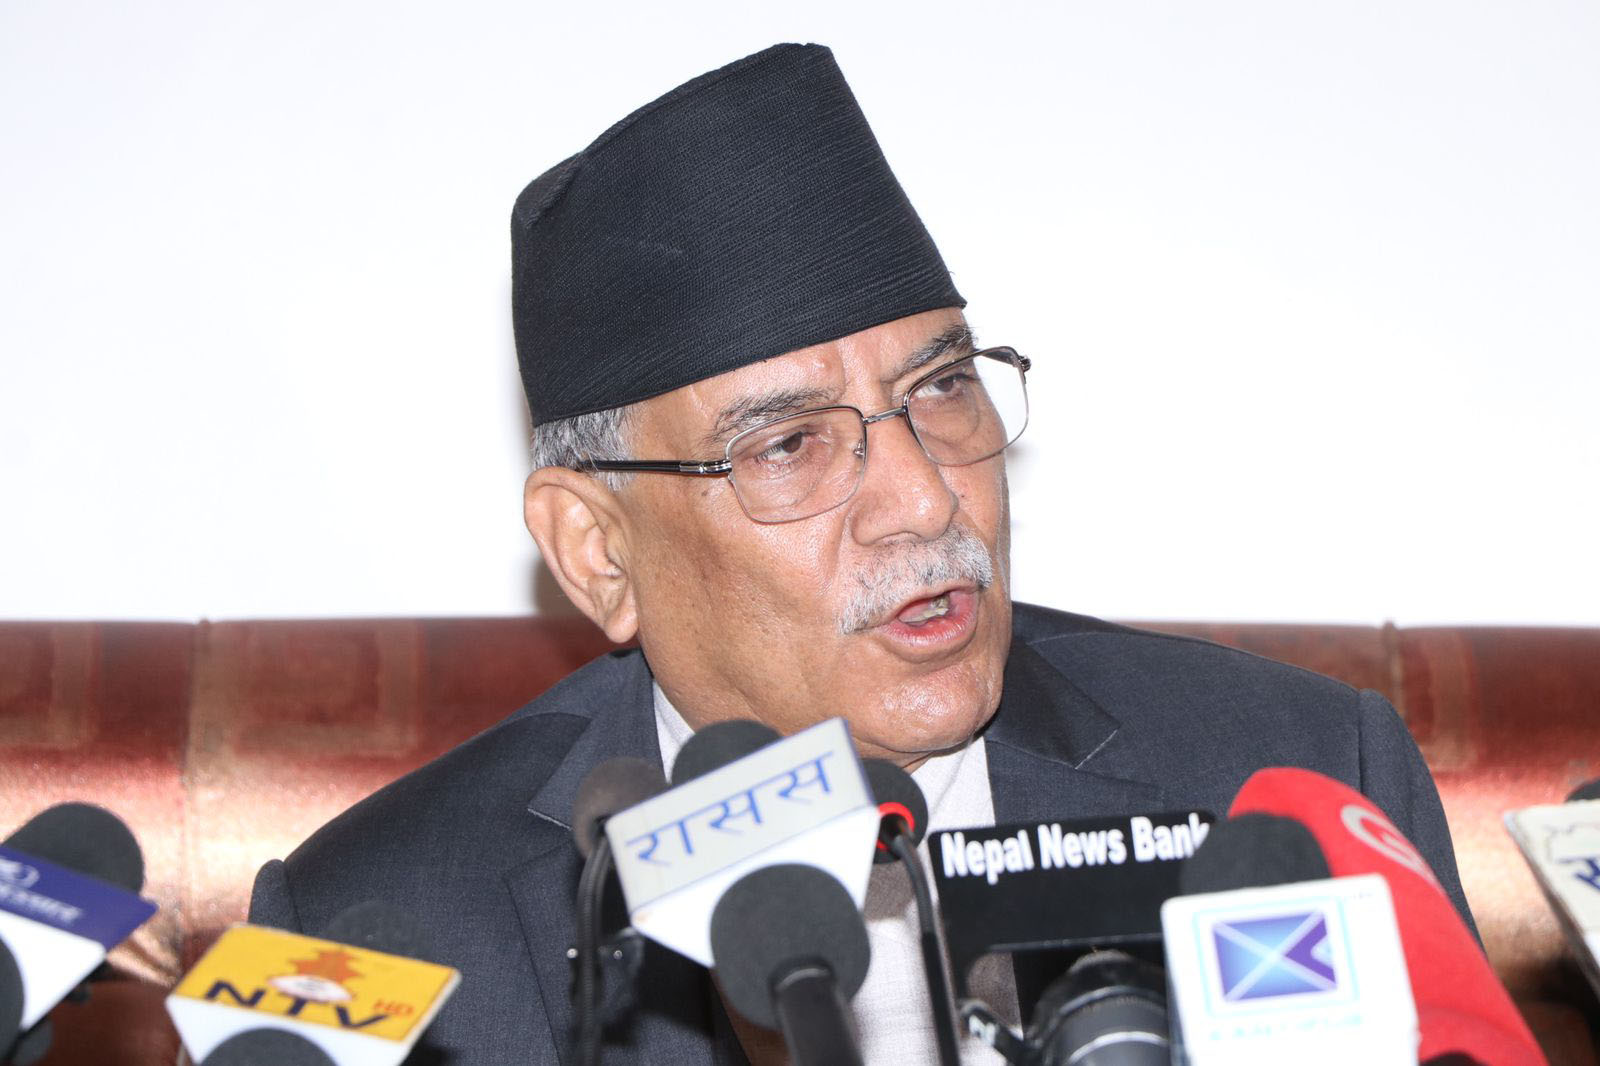 The culture of demanding resignation is not good: PM Dahal